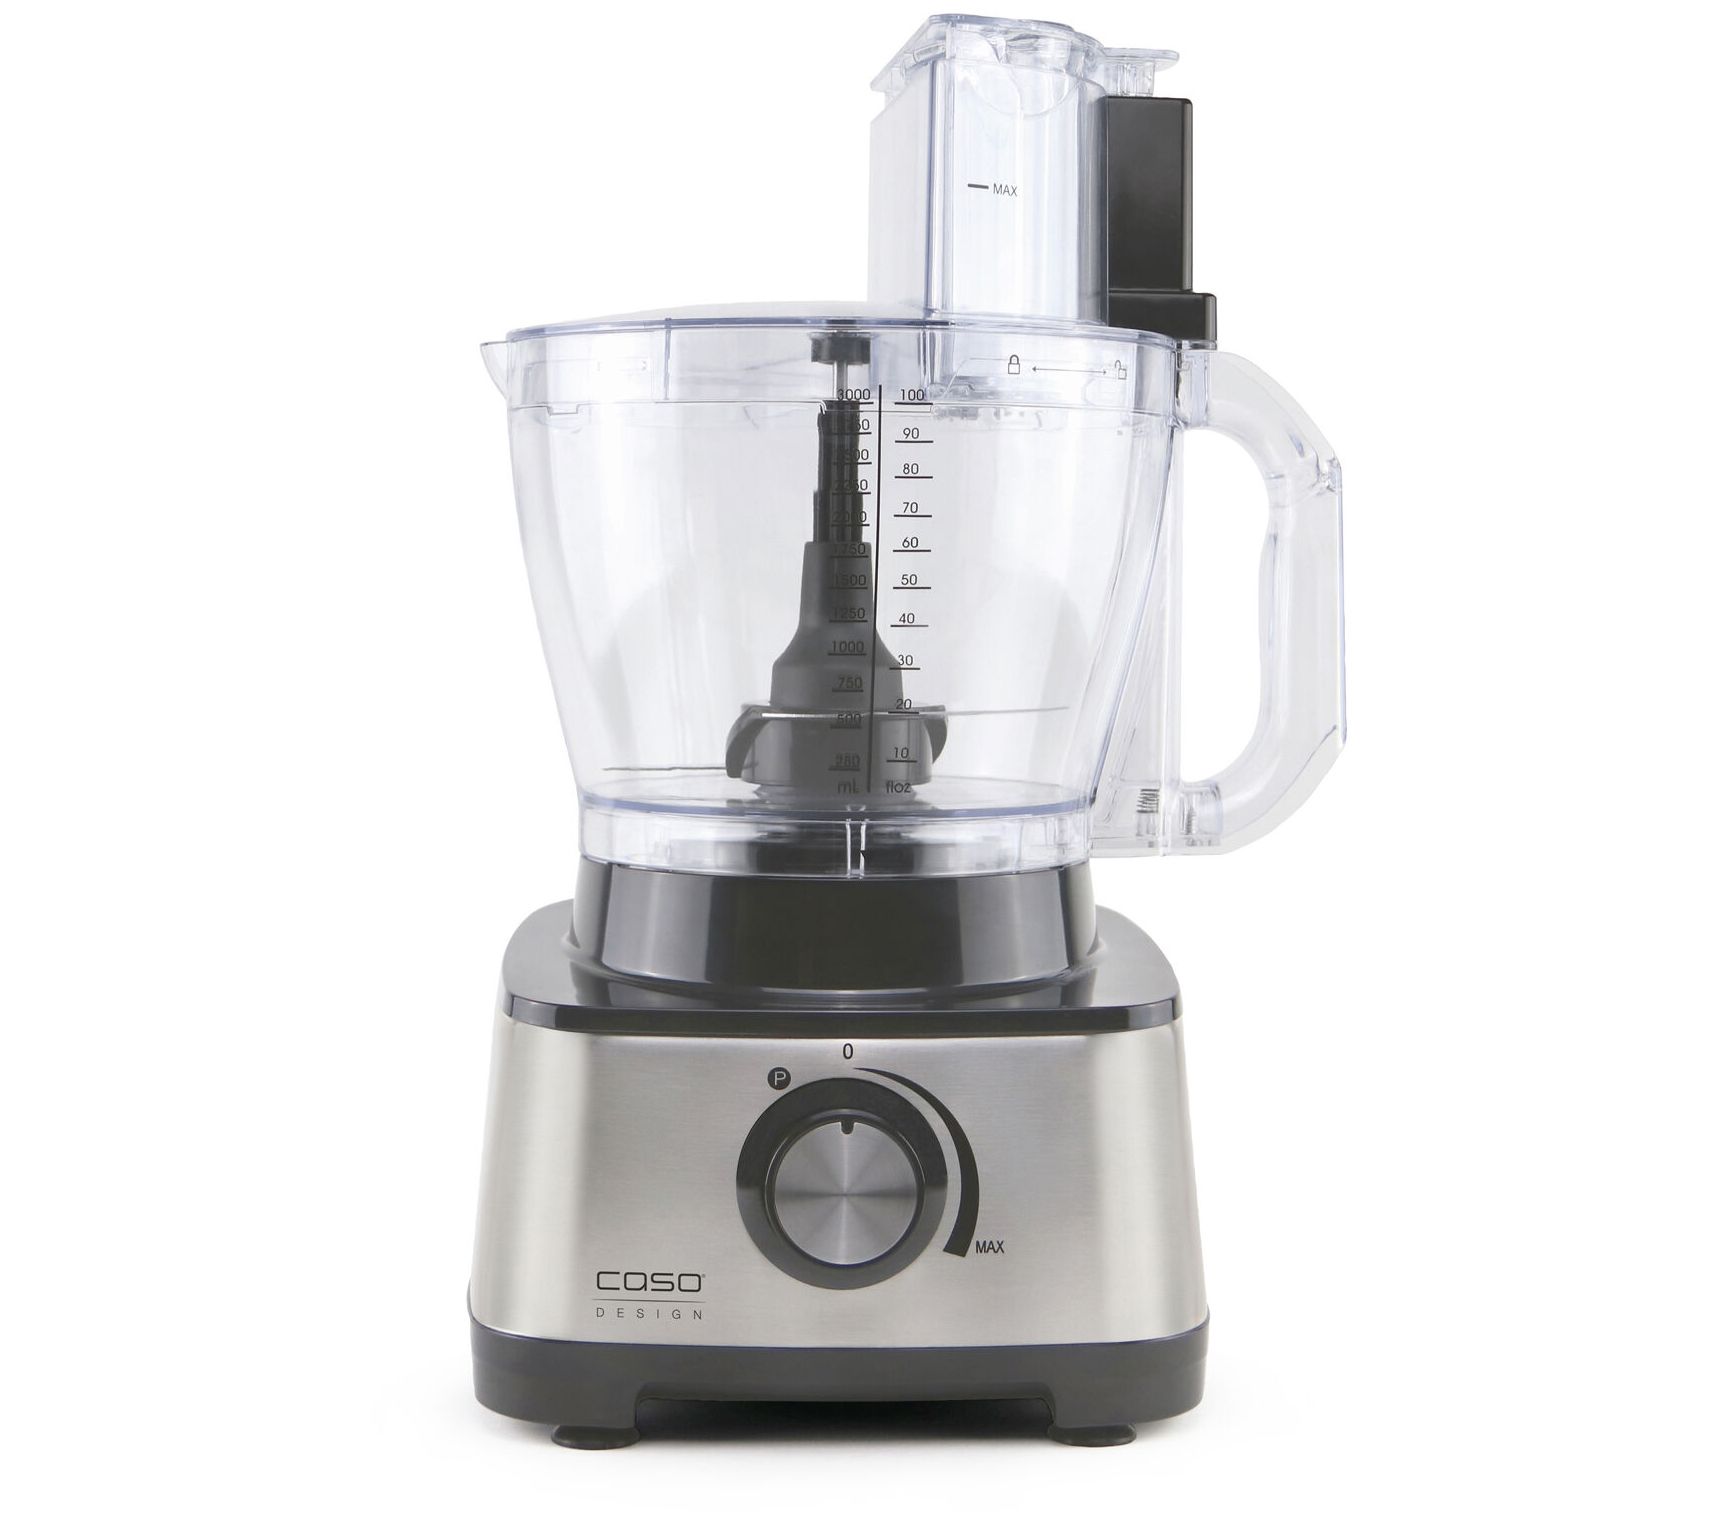 KitchenAid Food Processor KFP1333 13 Cup with Blades & Attachments